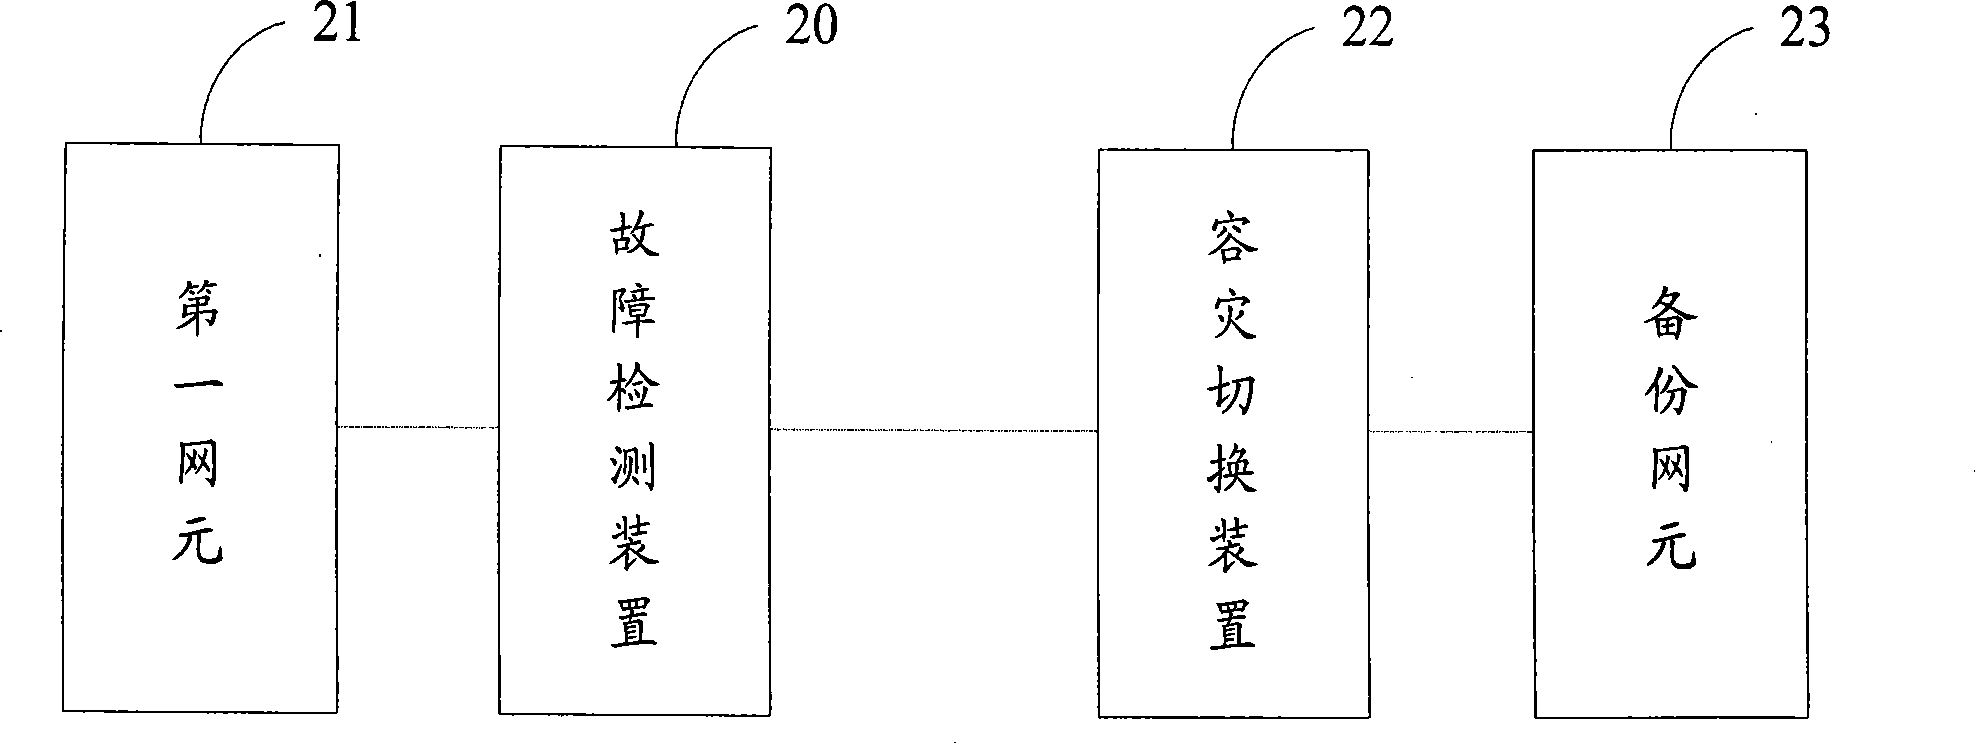 A disaster tolerance switching method, system and apparatus